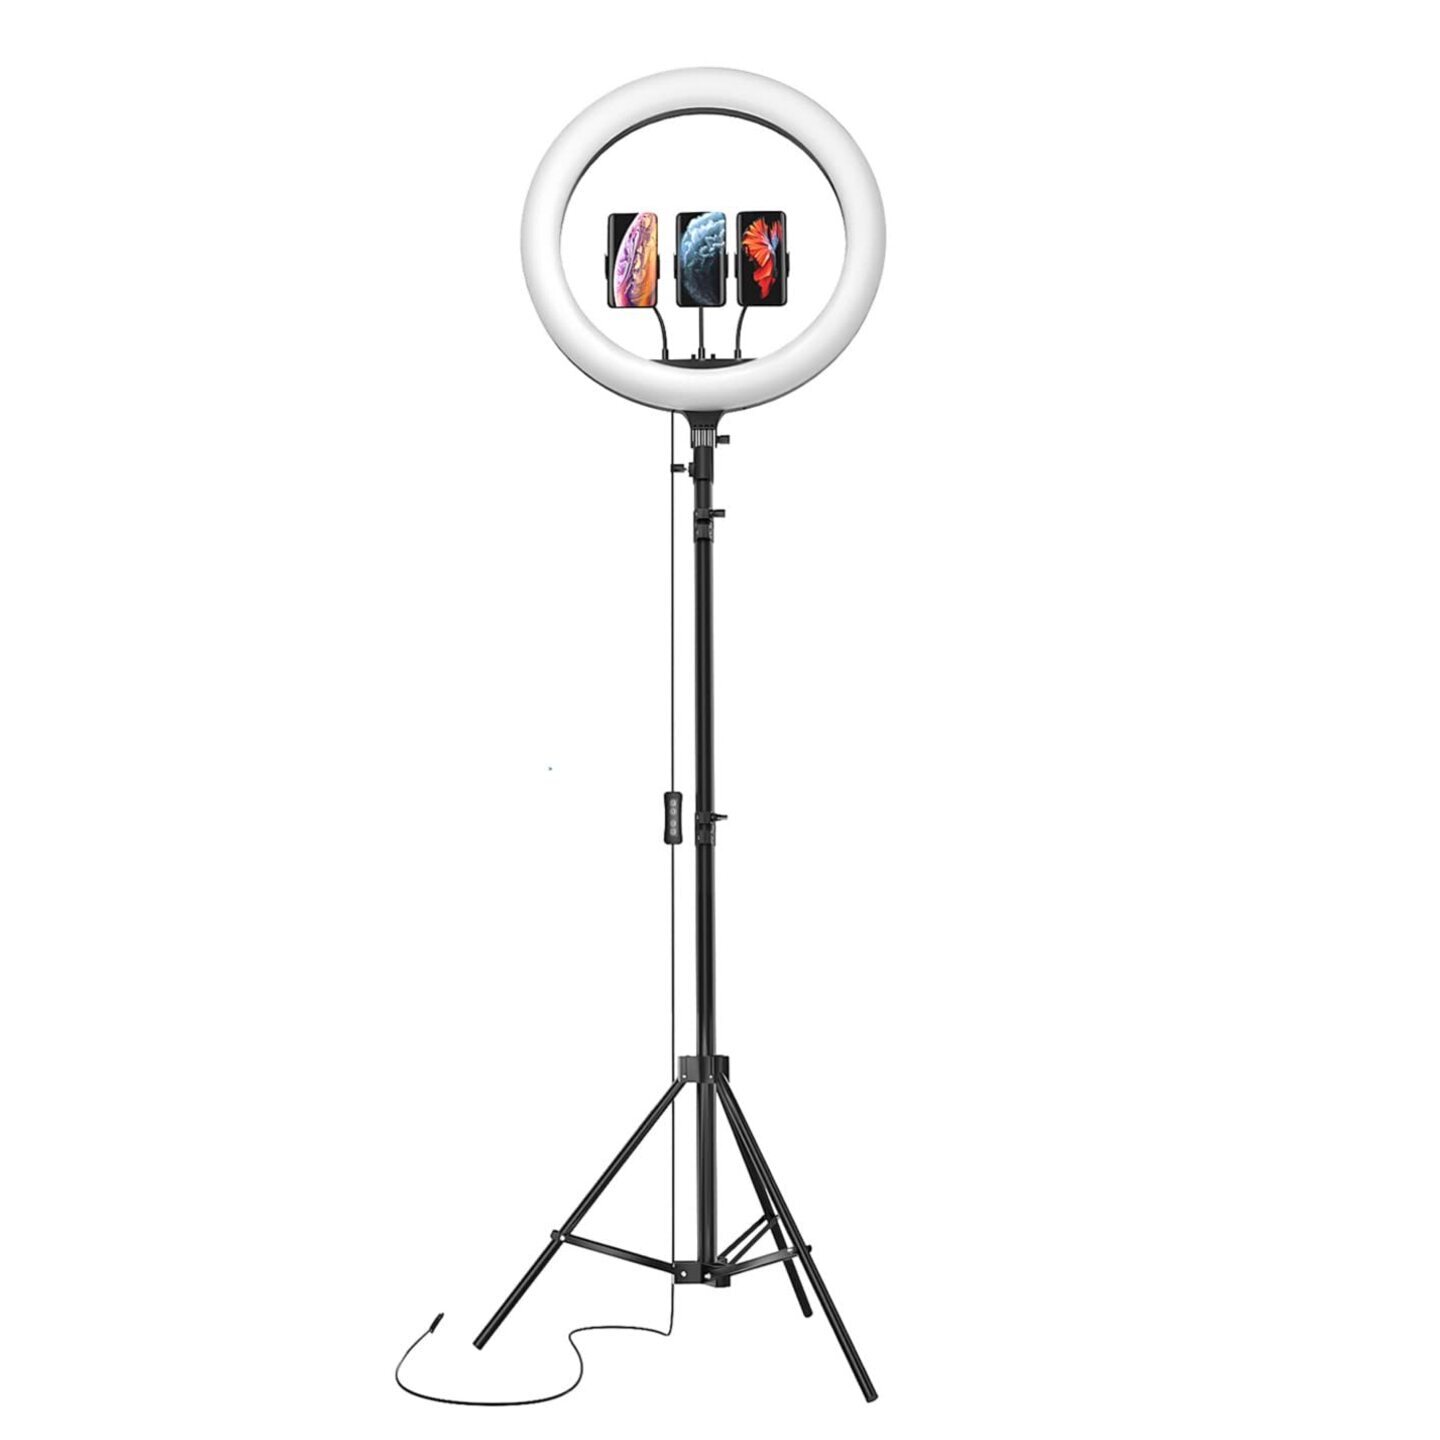 AB 14-inch Ring Light with Tripod and Dual Temperature Modes